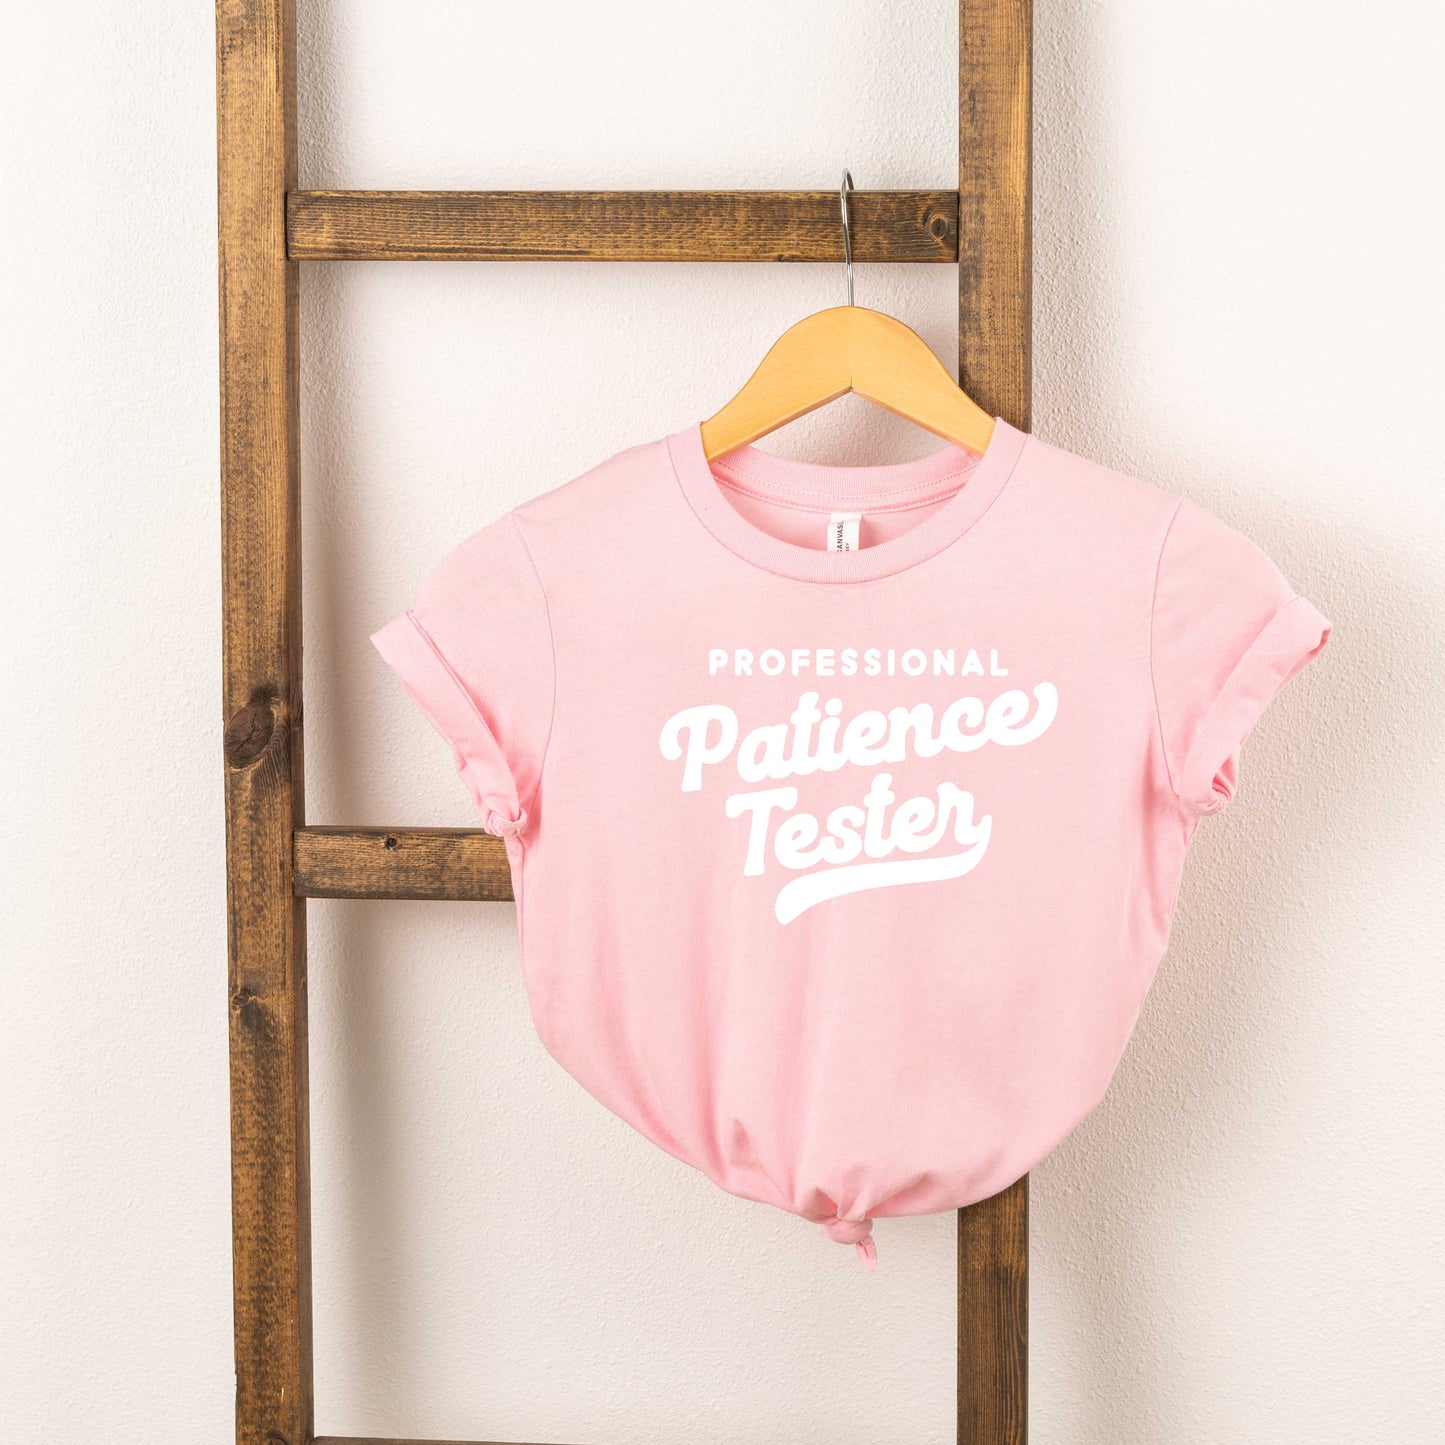 Retro Professional Patience Tester | Toddler Short Sleeve Crew Neck